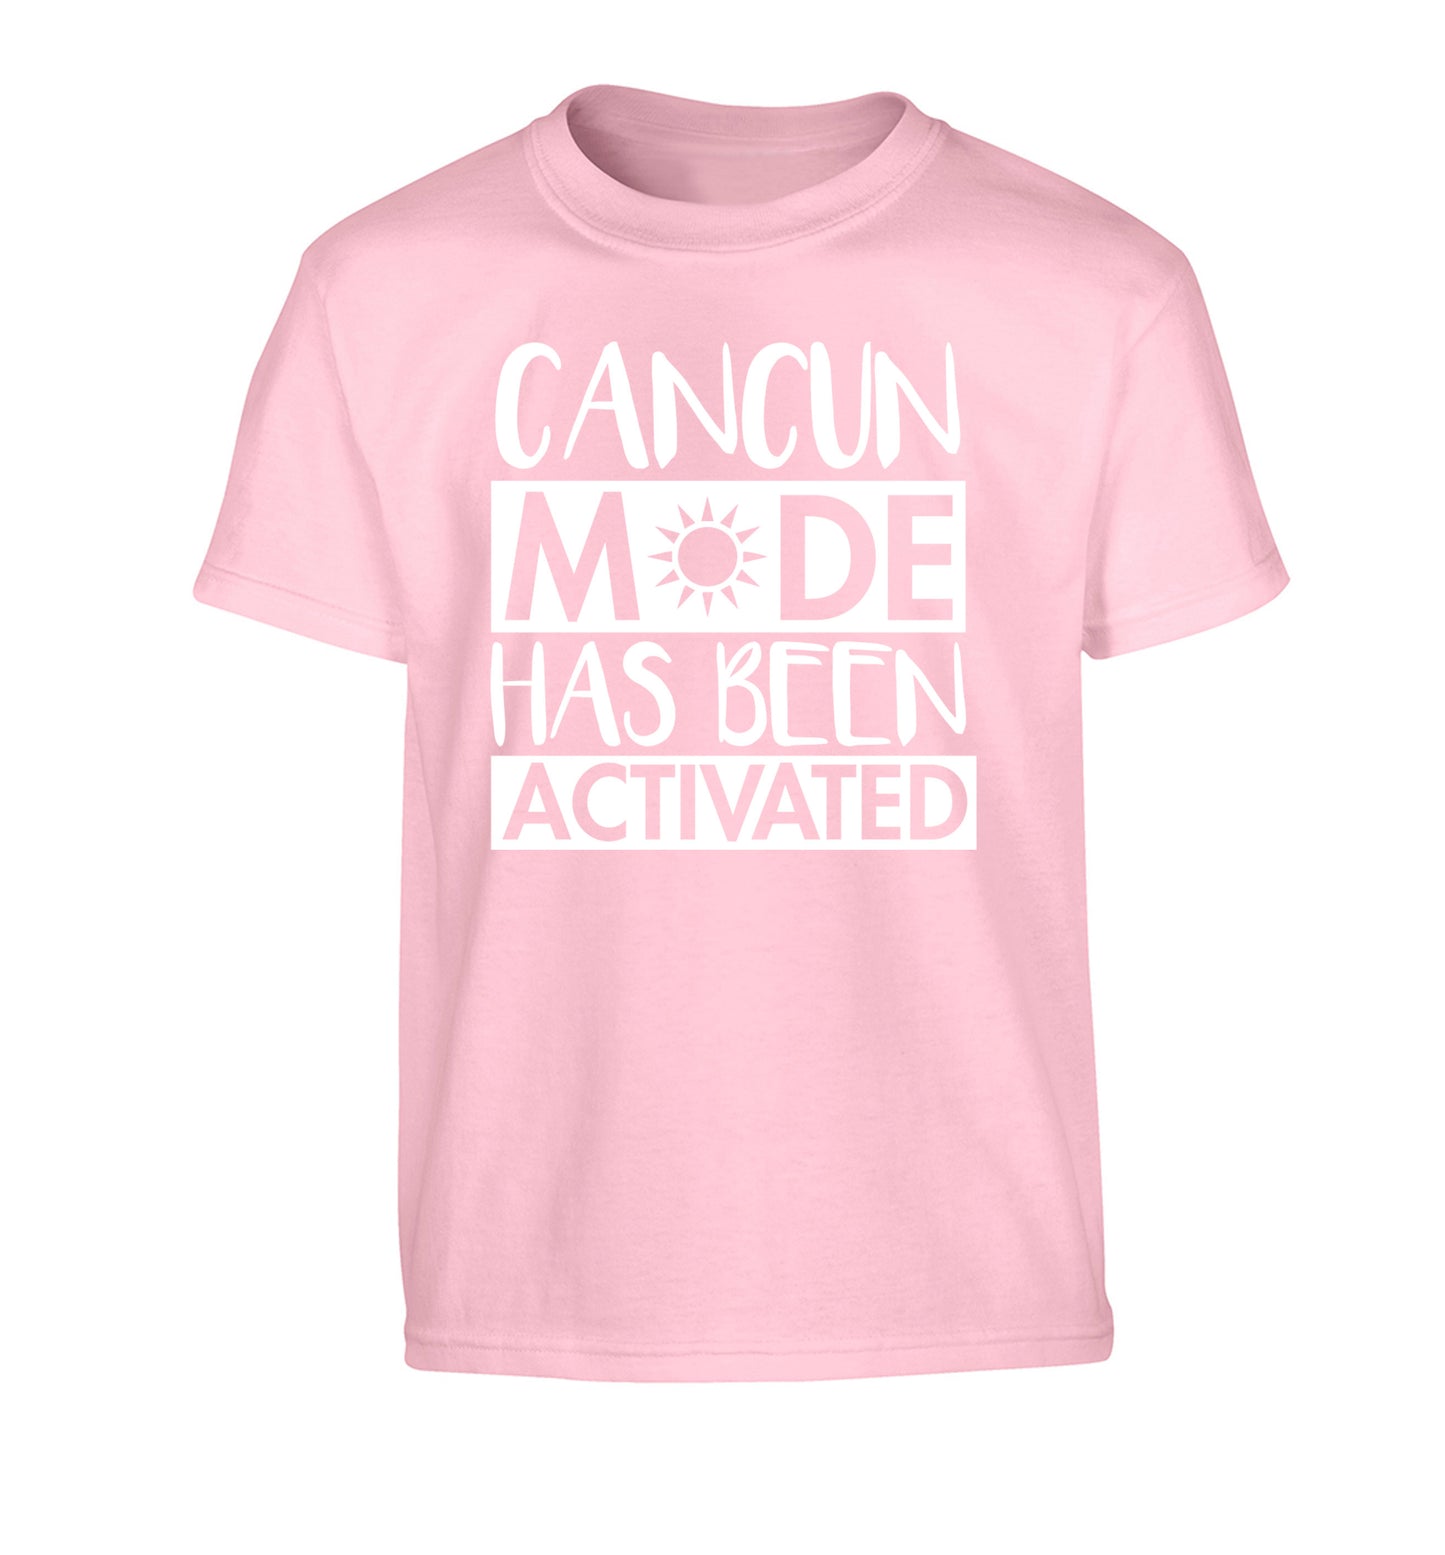 Cancun mode has been activated Children's light pink Tshirt 12-14 Years